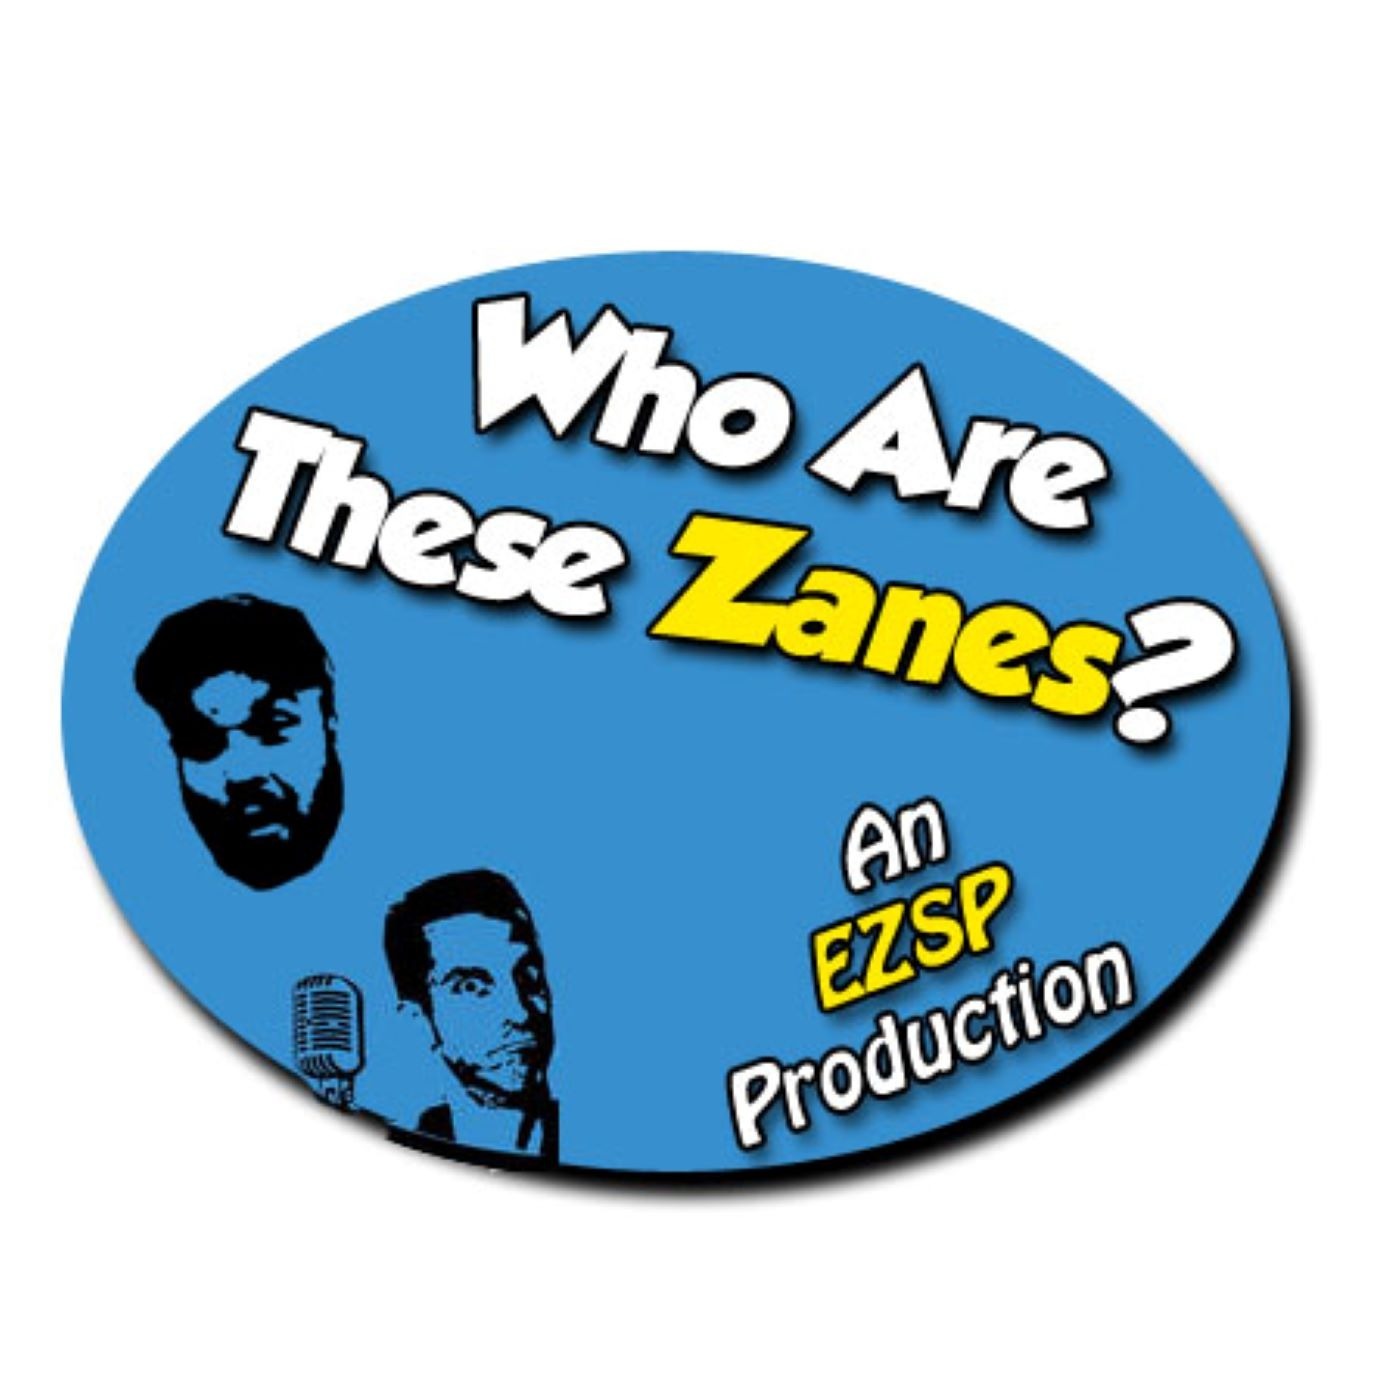 Free Clip - Who Are These Zanes? Ep 44 - 